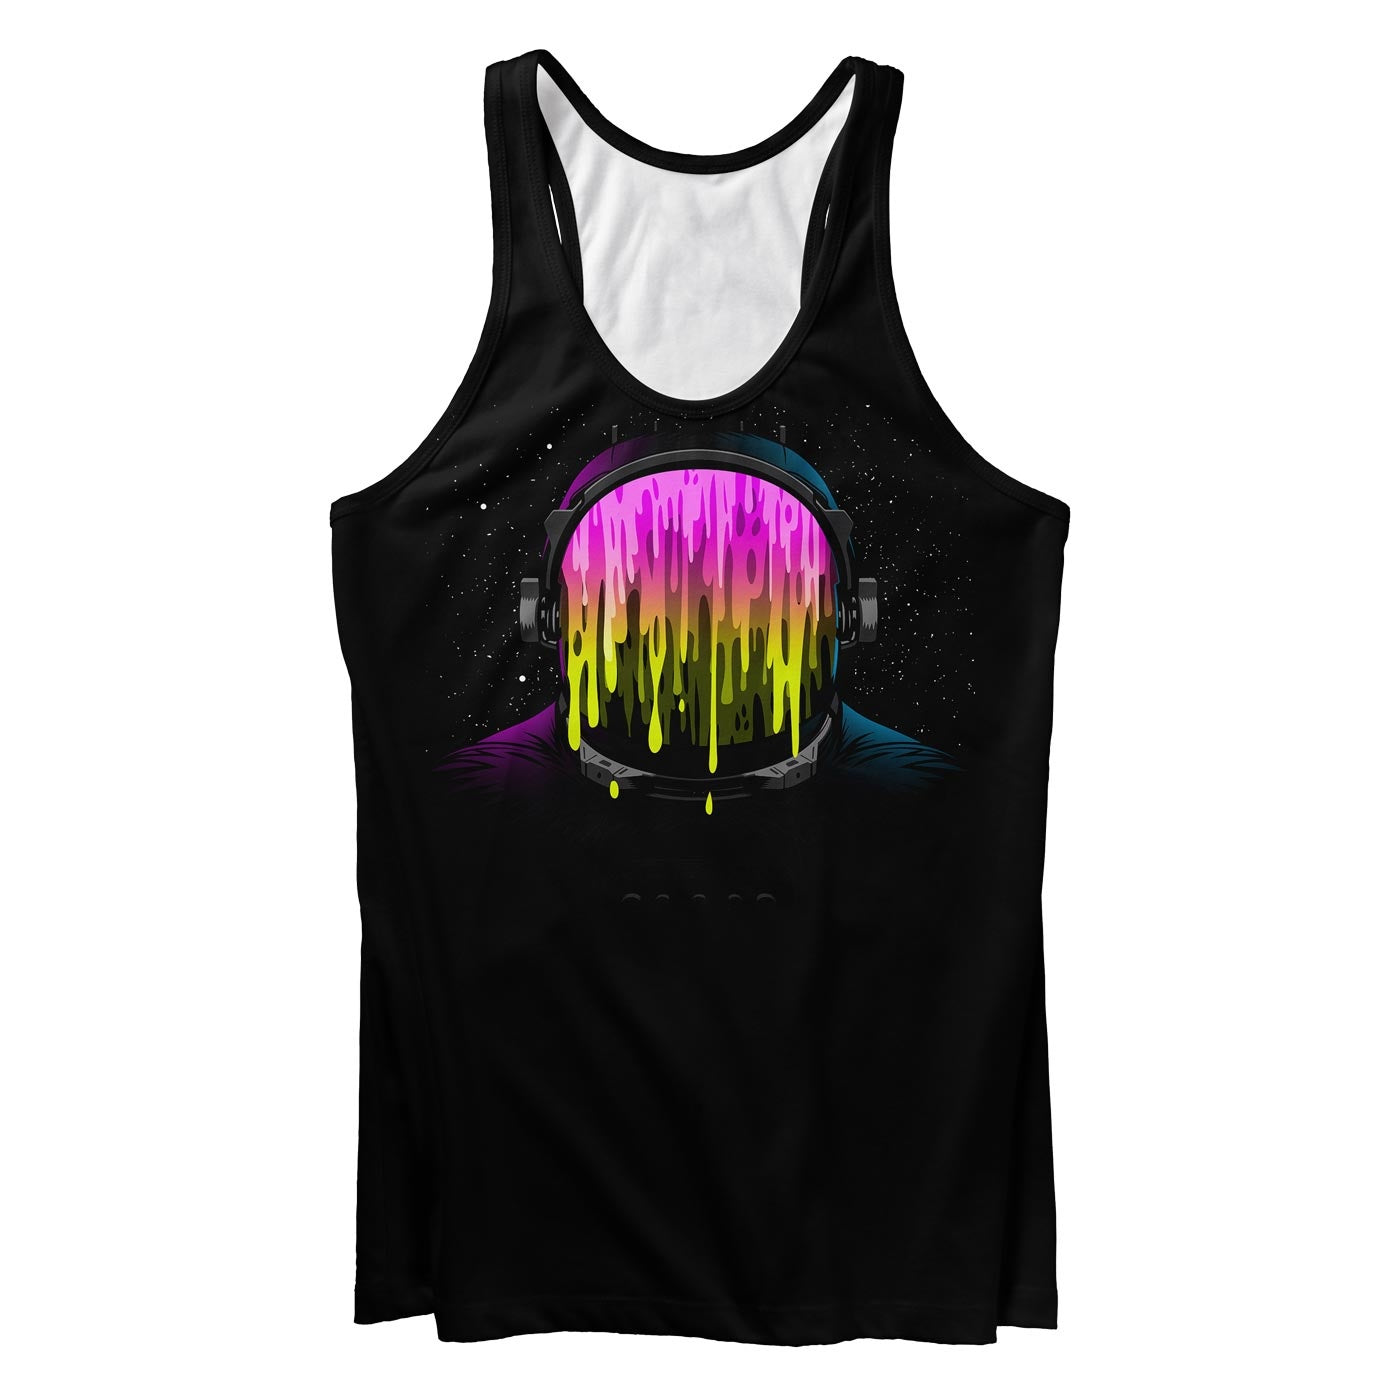 Drippin Out Tank Top